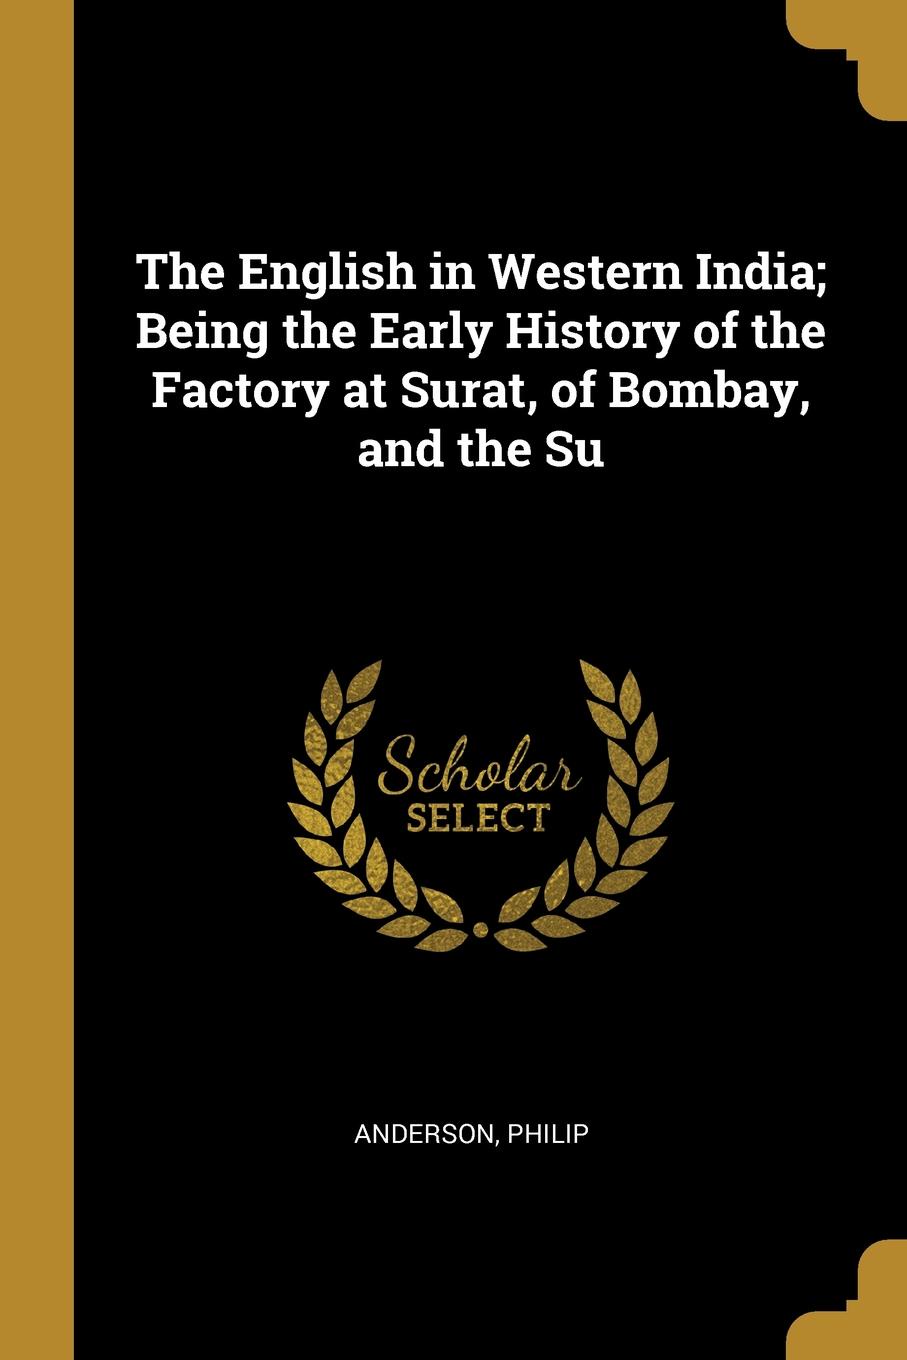 The English in Western India; Being the Early History of the Factory at Surat, of Bombay, and the Su